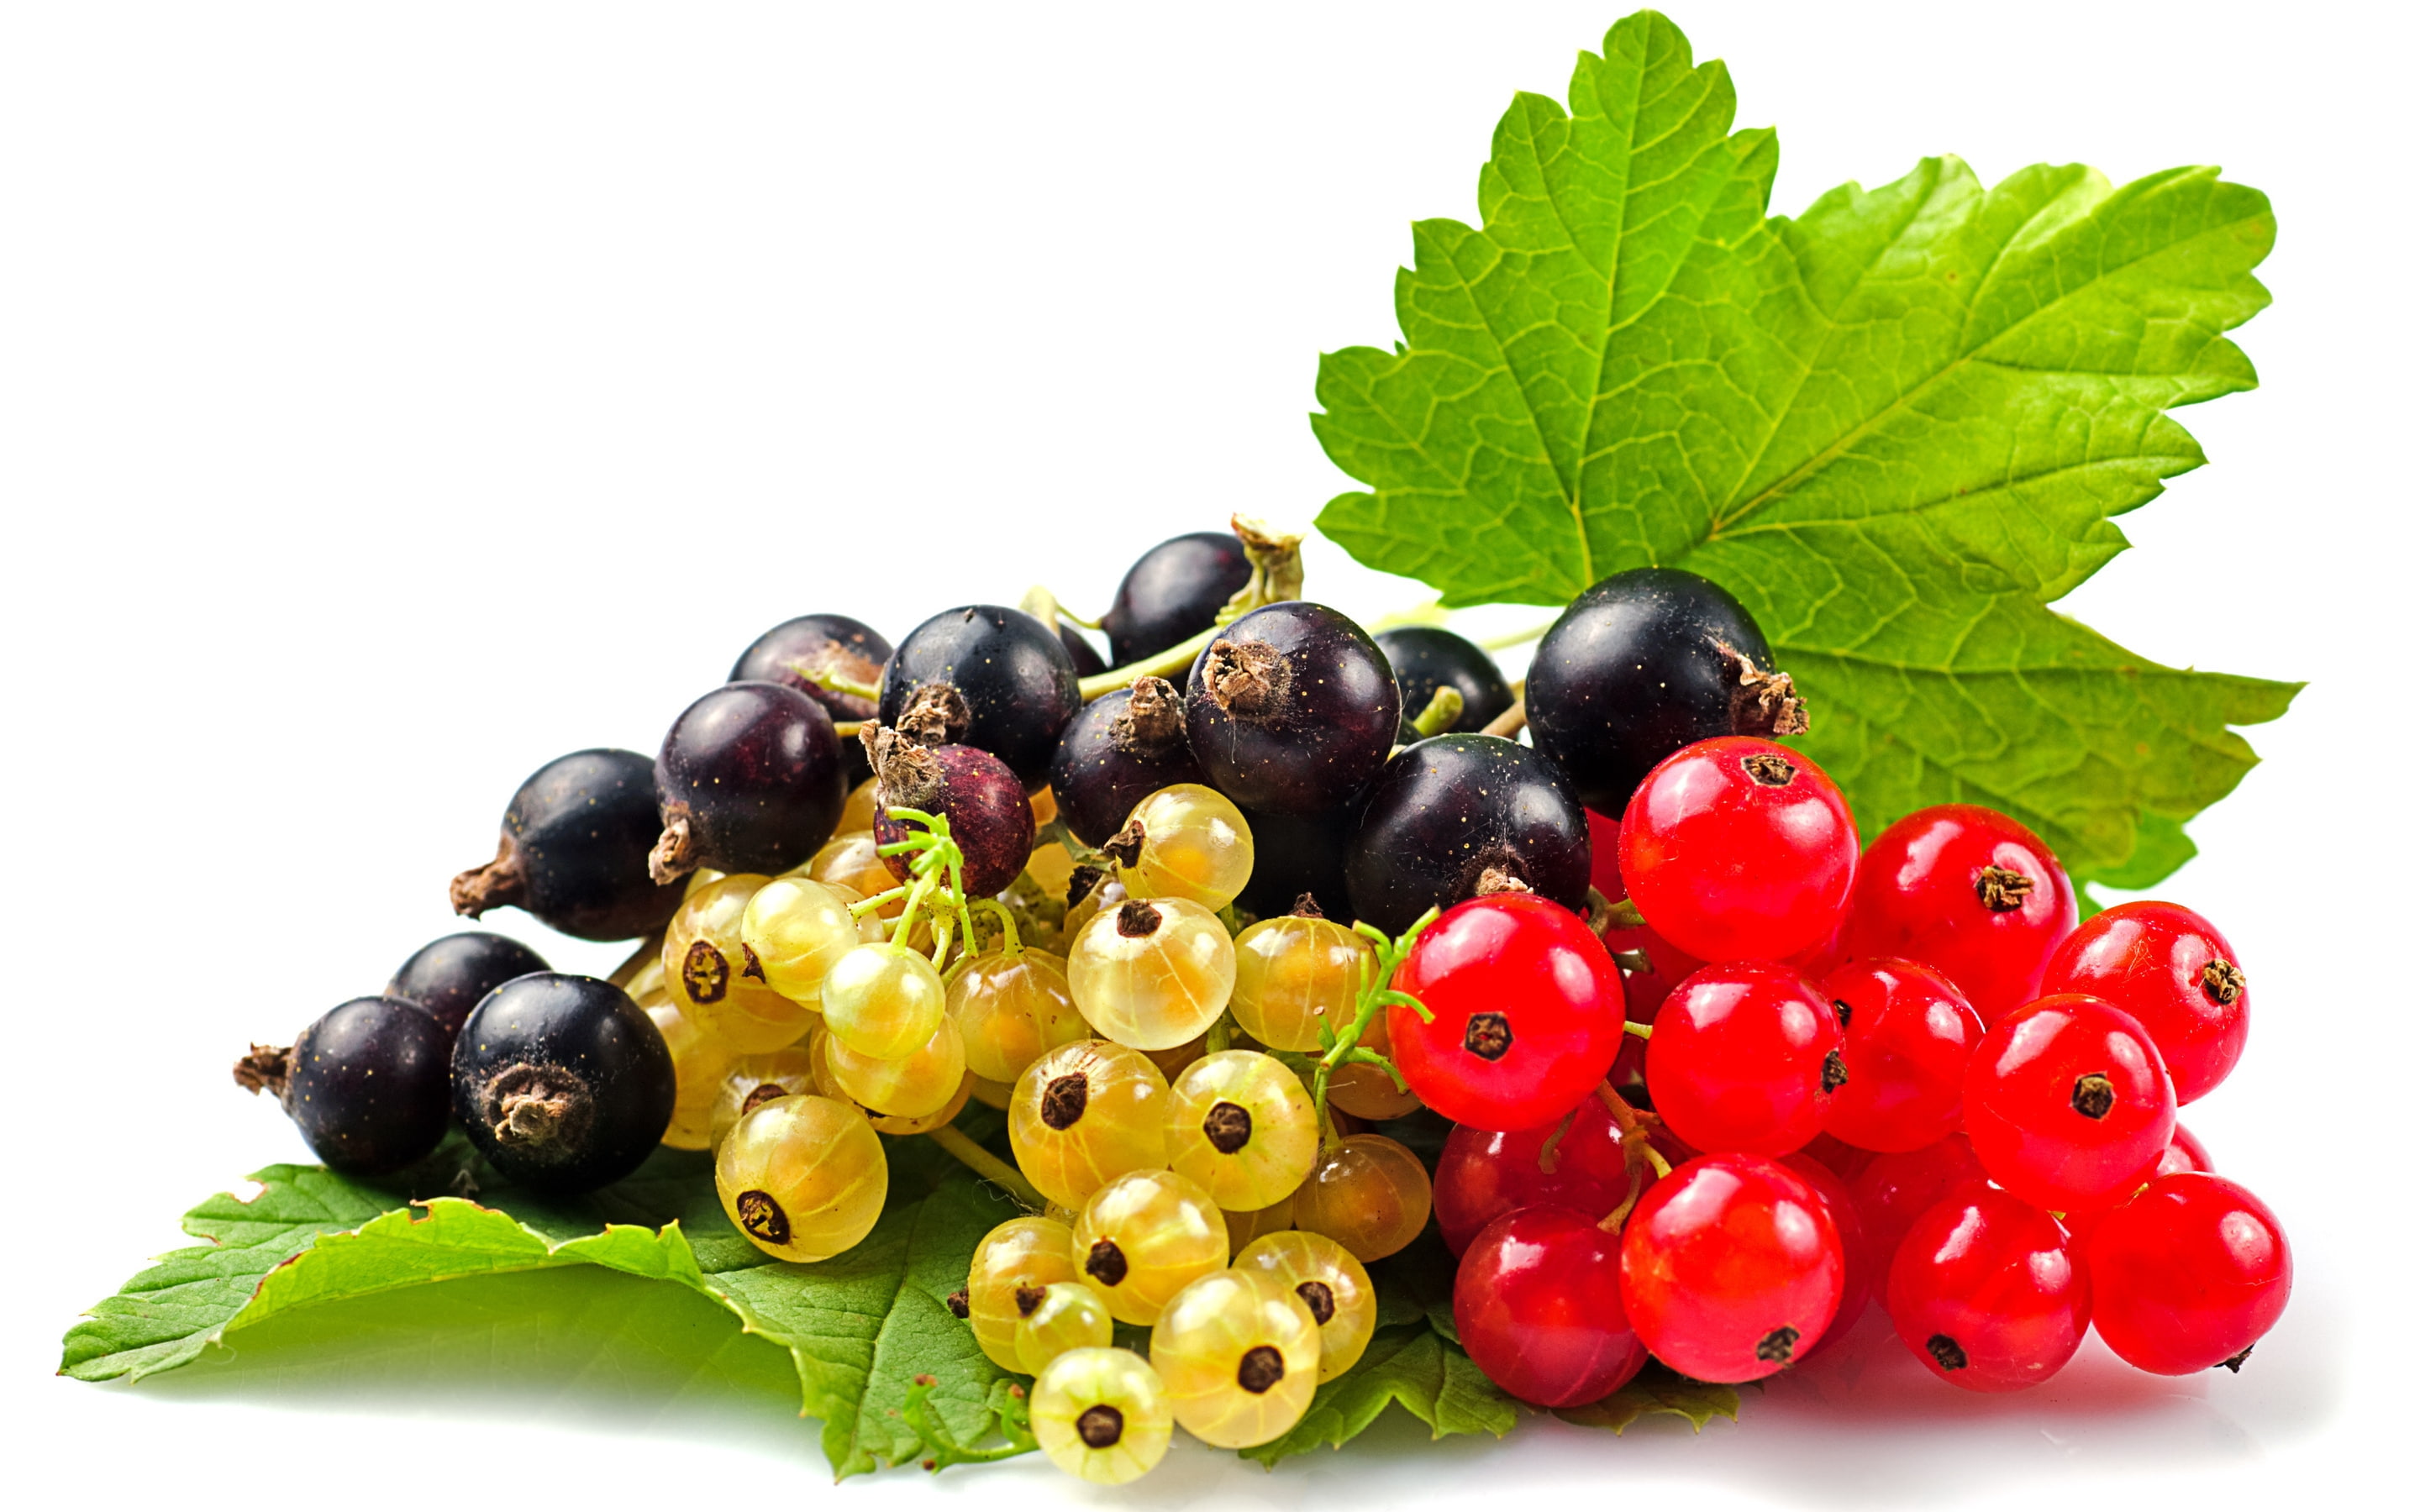 Currants Selection, black currants, white currants, red currants